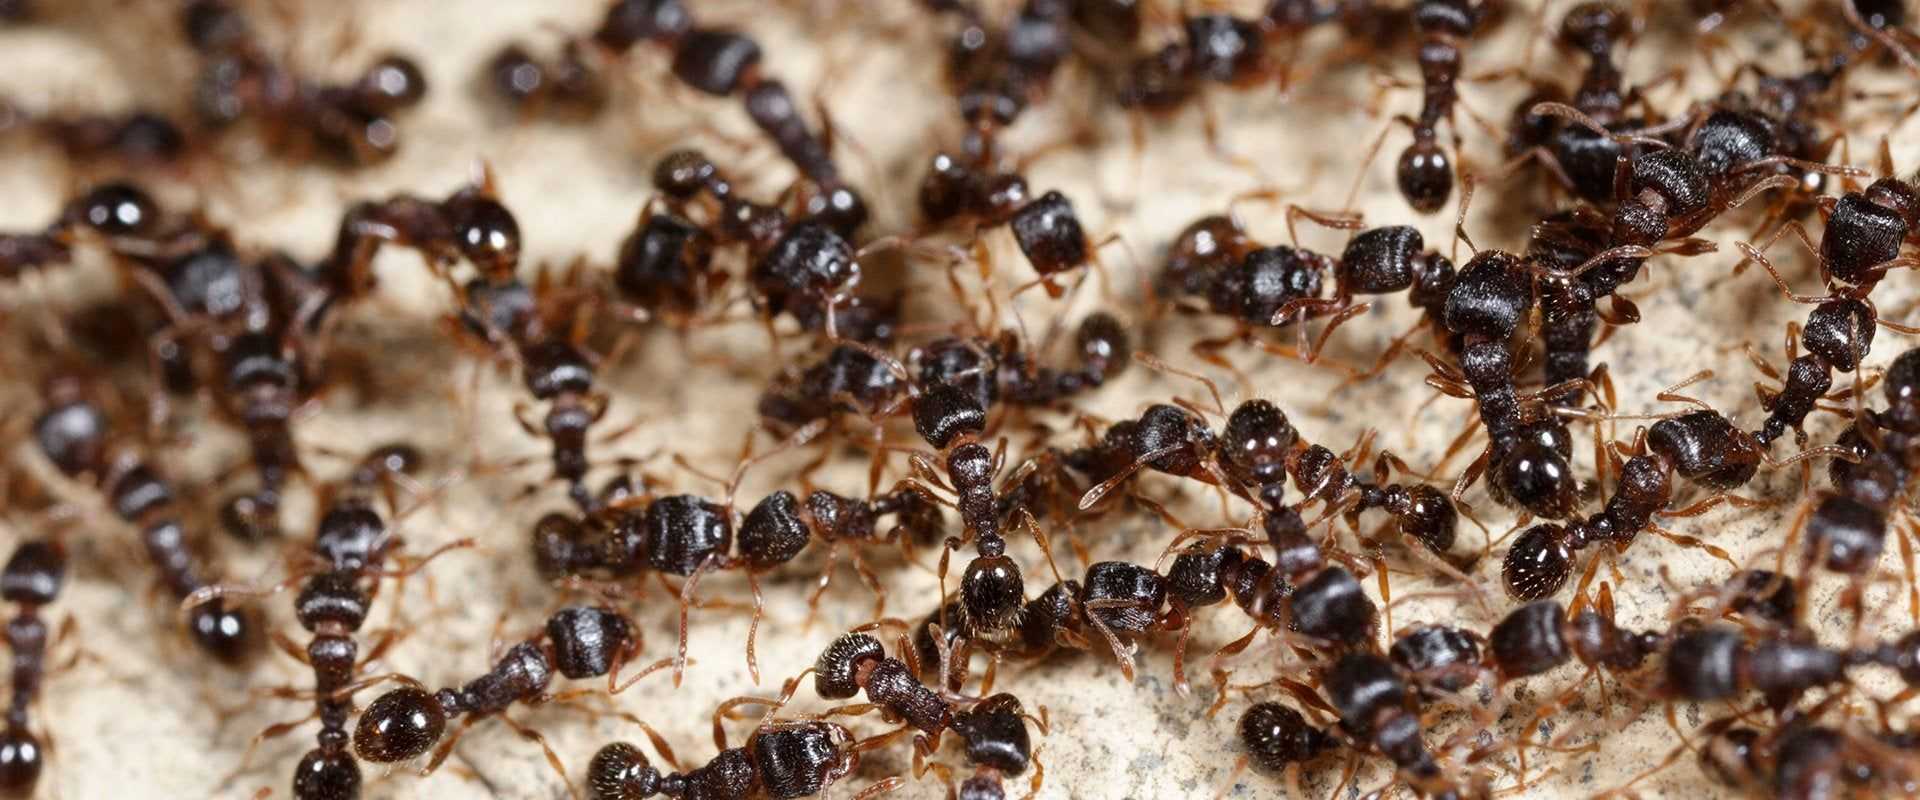 a huge swarm of ants in a residential kitchen